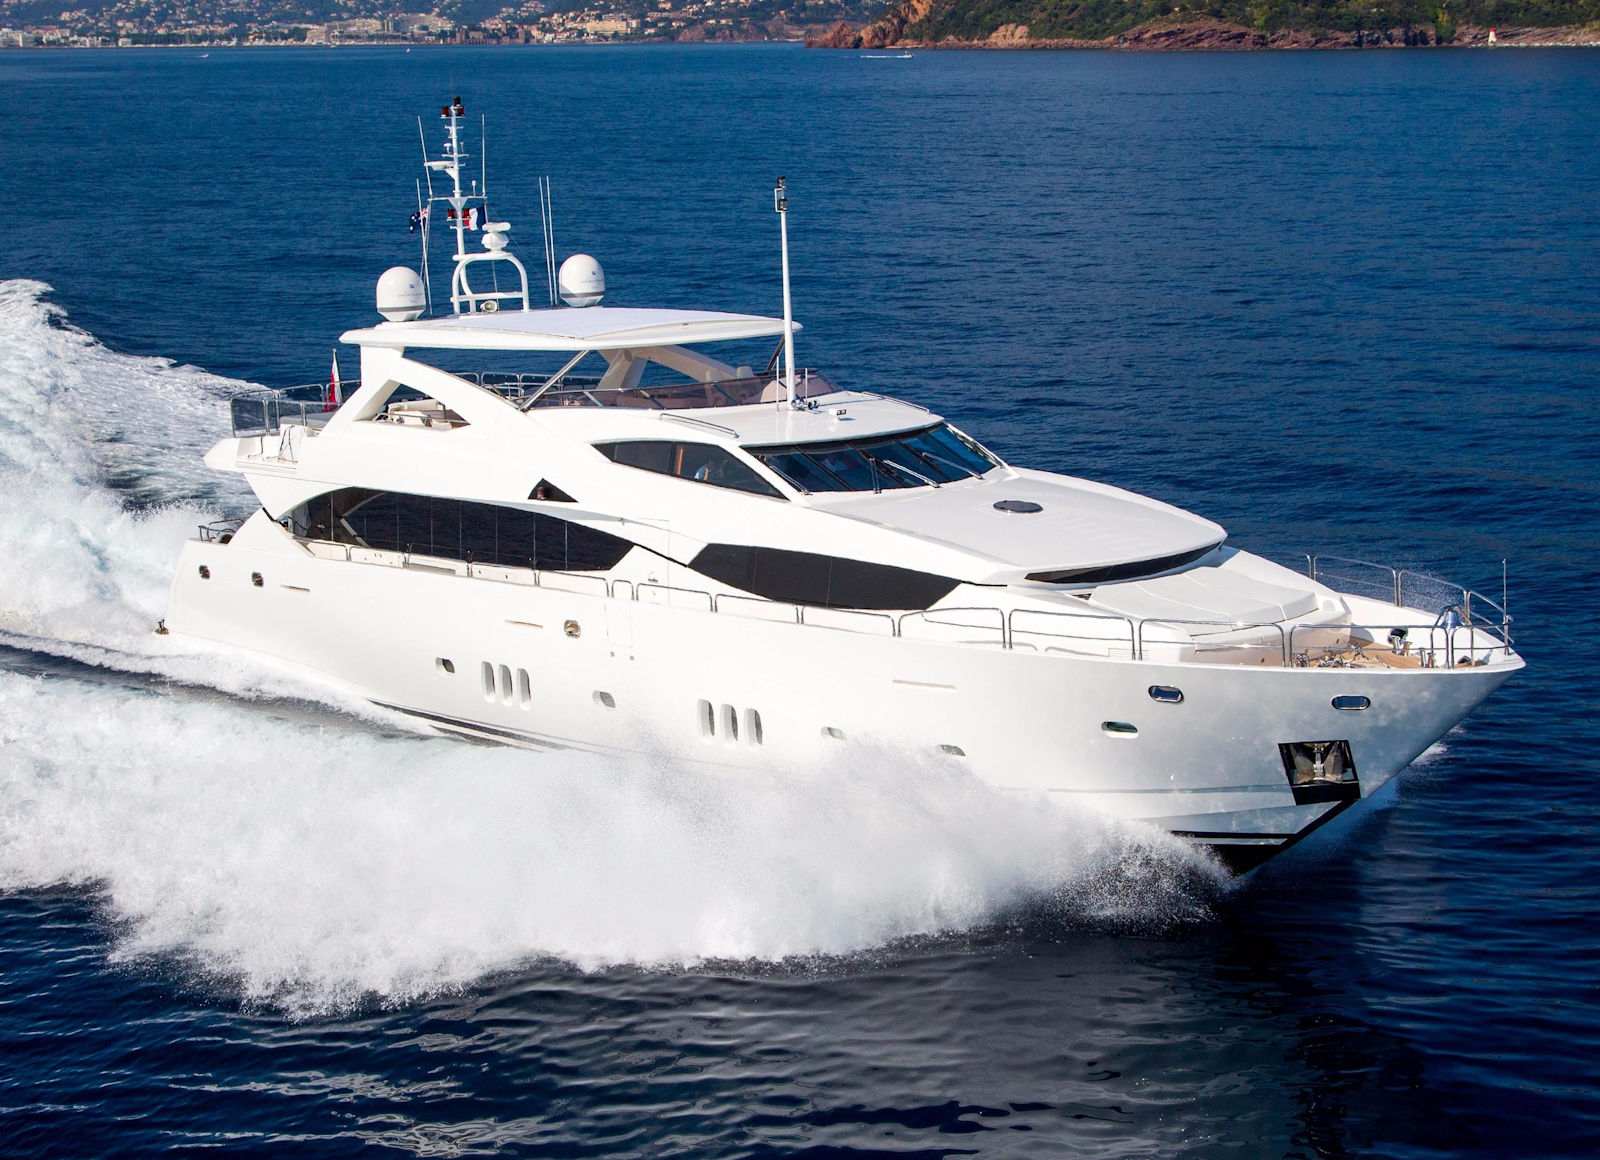 360 VR Virtual Tours of the Sunseeker 34 Metre